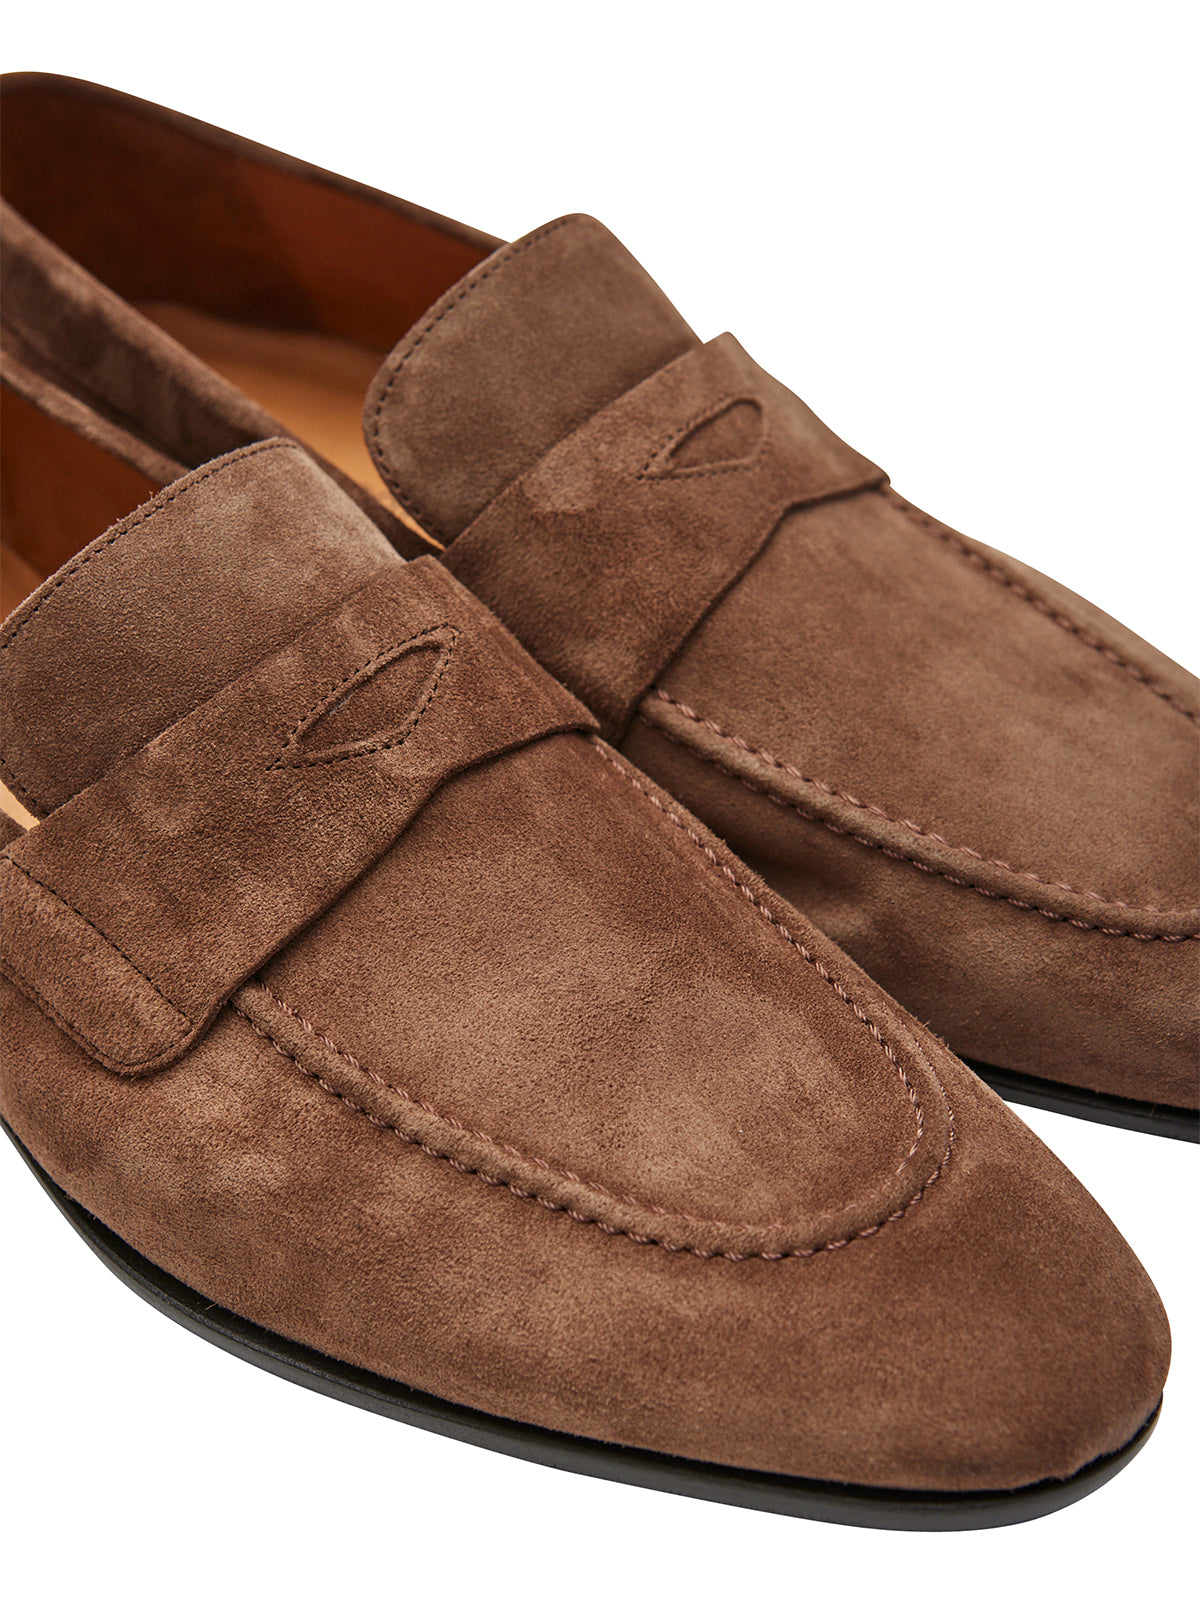 Chocolate Brown Suede Soft Loafer